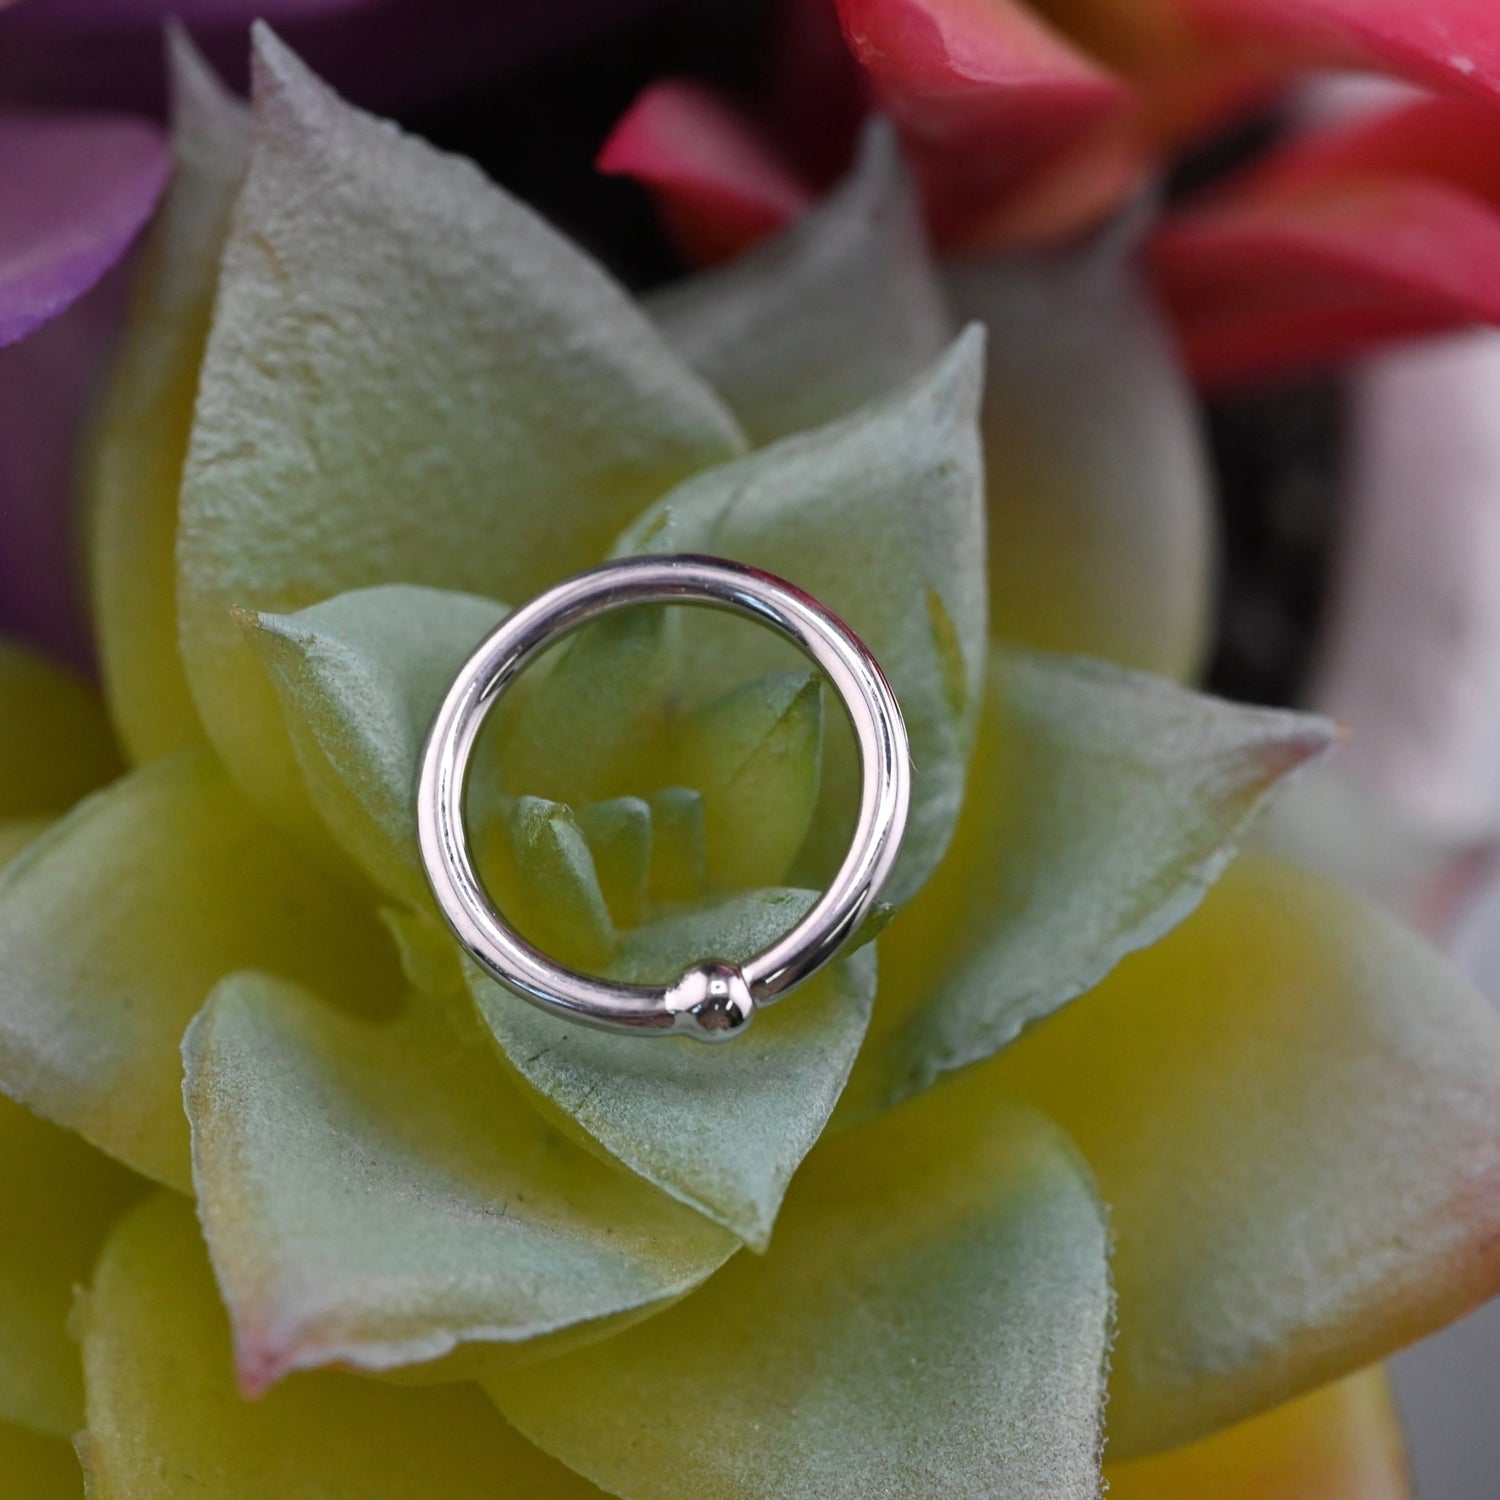 16g Fixed Bead Ring with 2mm Bead - Agave in Bloom